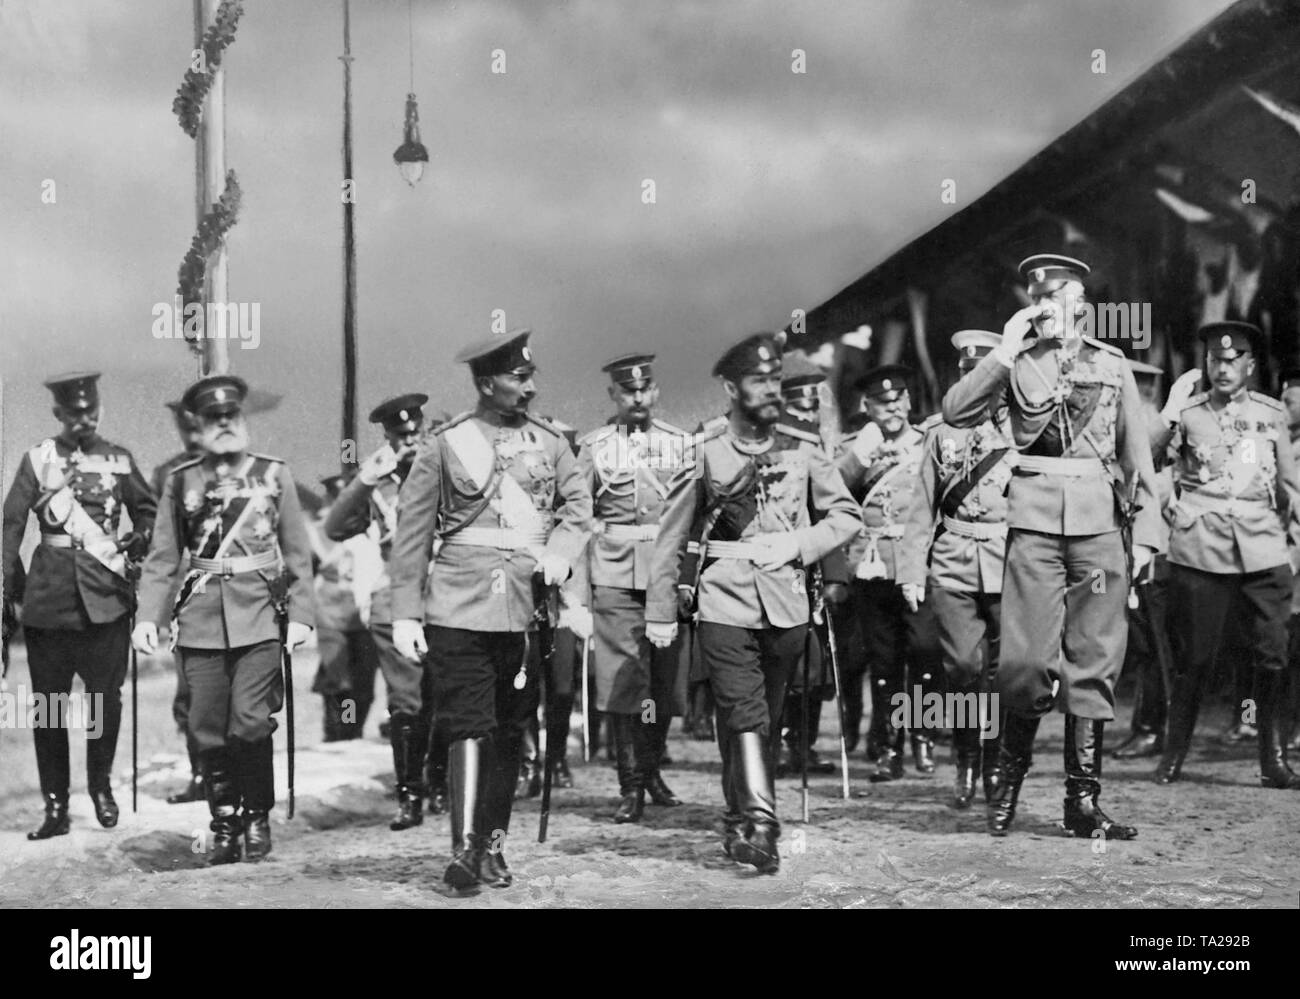 Emperor Wilhelm II (3rd from left), Tsar Nicholas II (4th from left) and Grand Duke Nikolai Nikolaevich (5th from left) take the salute of the Vyborg regiment at the leaders meeting in Baltischport. Stock Photo